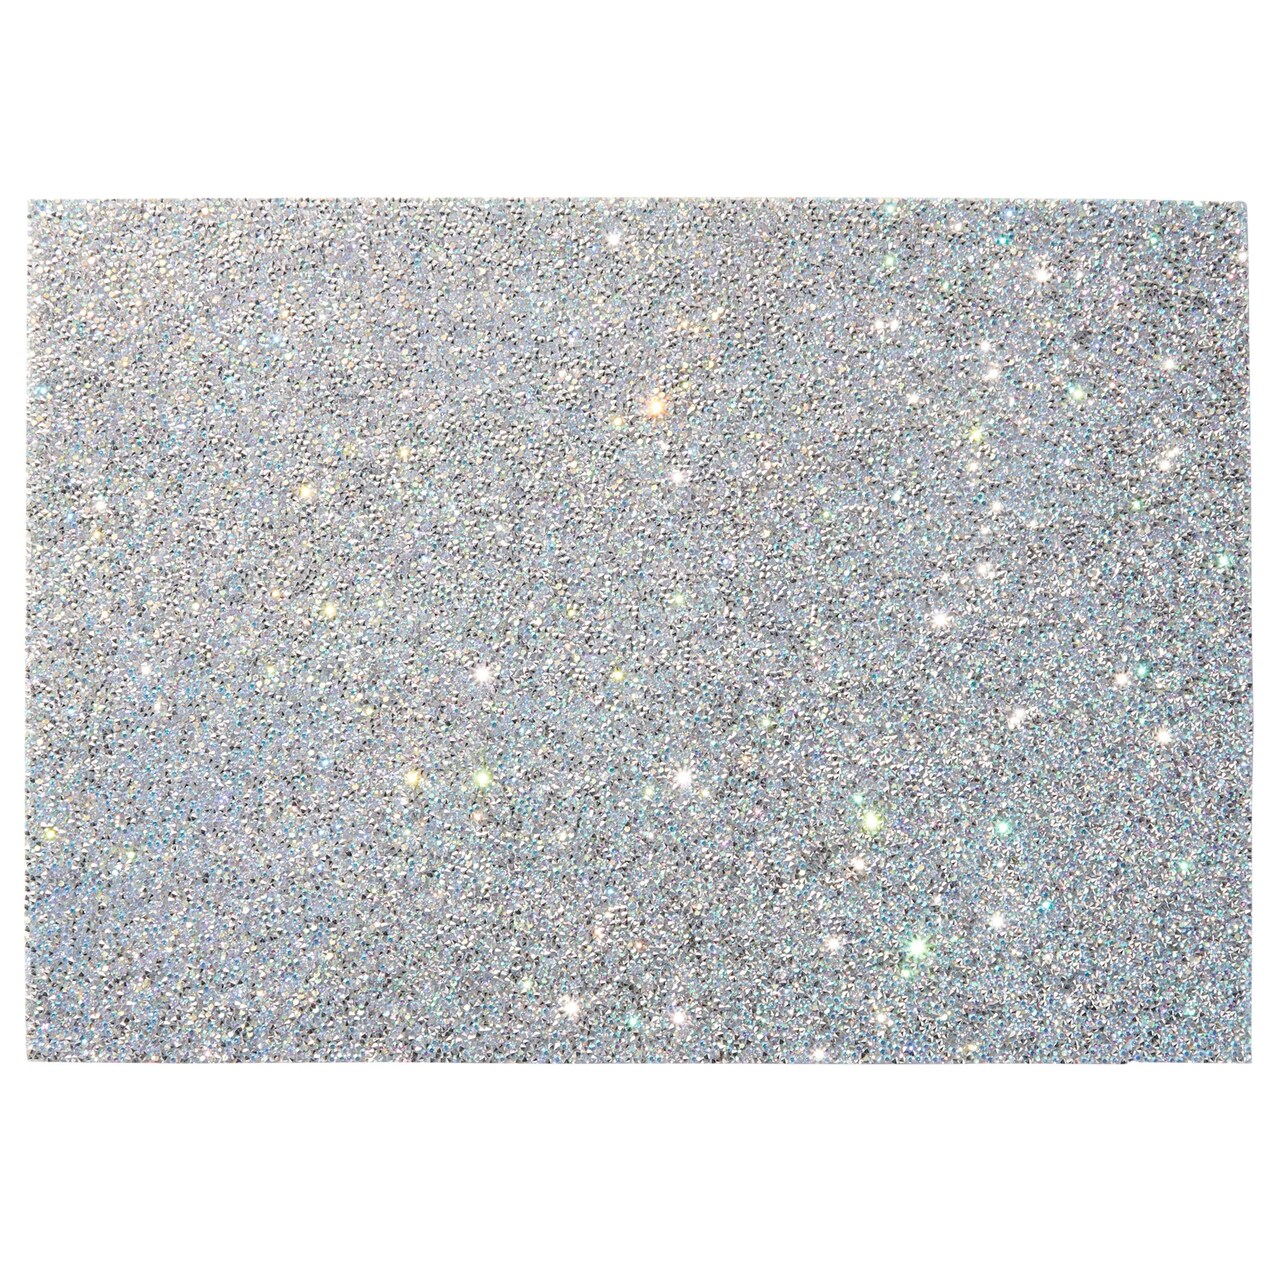 17x12-Inch Glitter Nail Mat for Pictures, Manicure Hand Rest (Dark Silver)